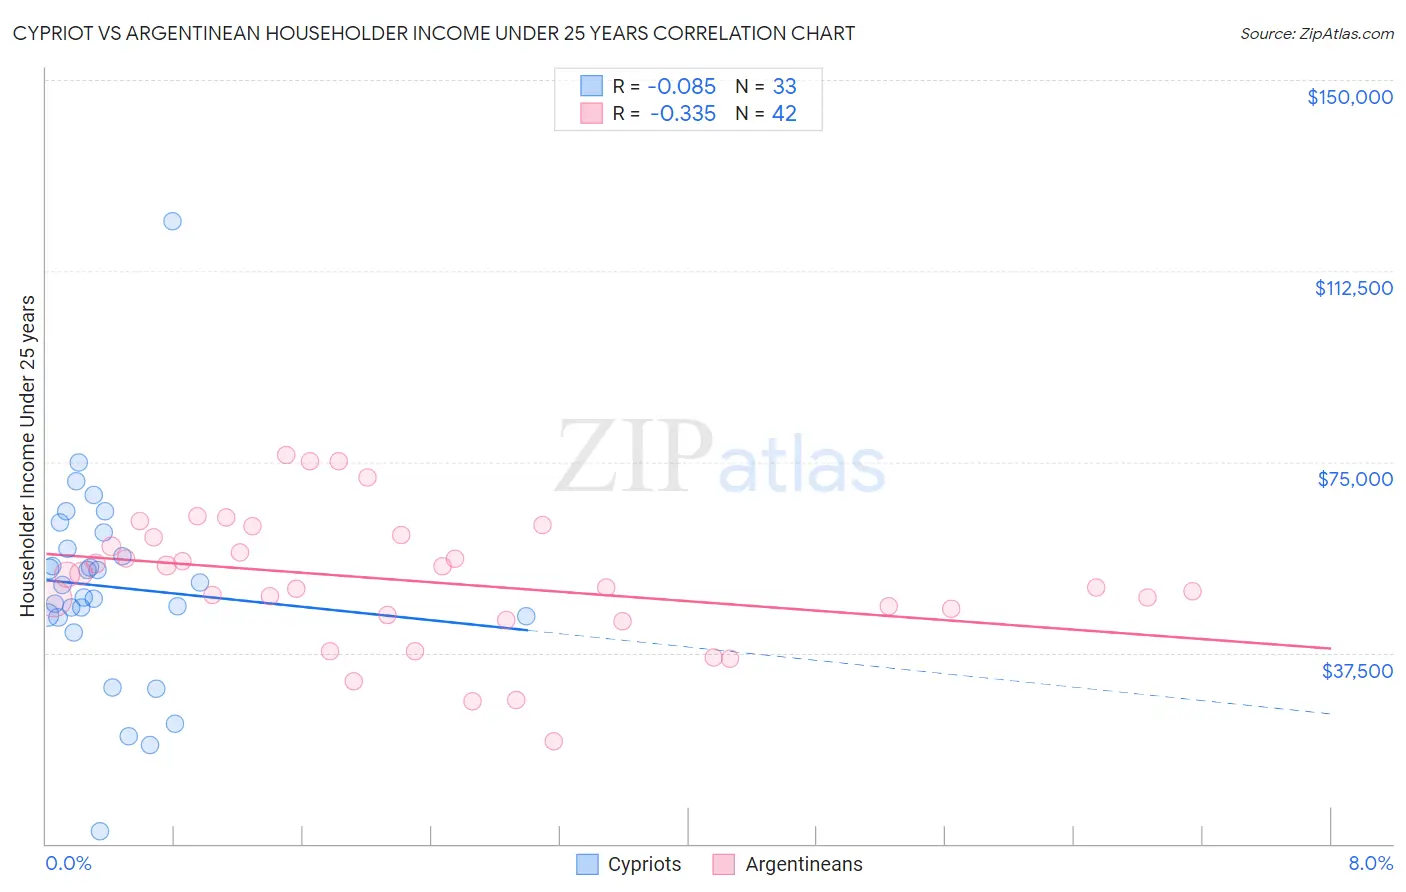 Cypriot vs Argentinean Householder Income Under 25 years